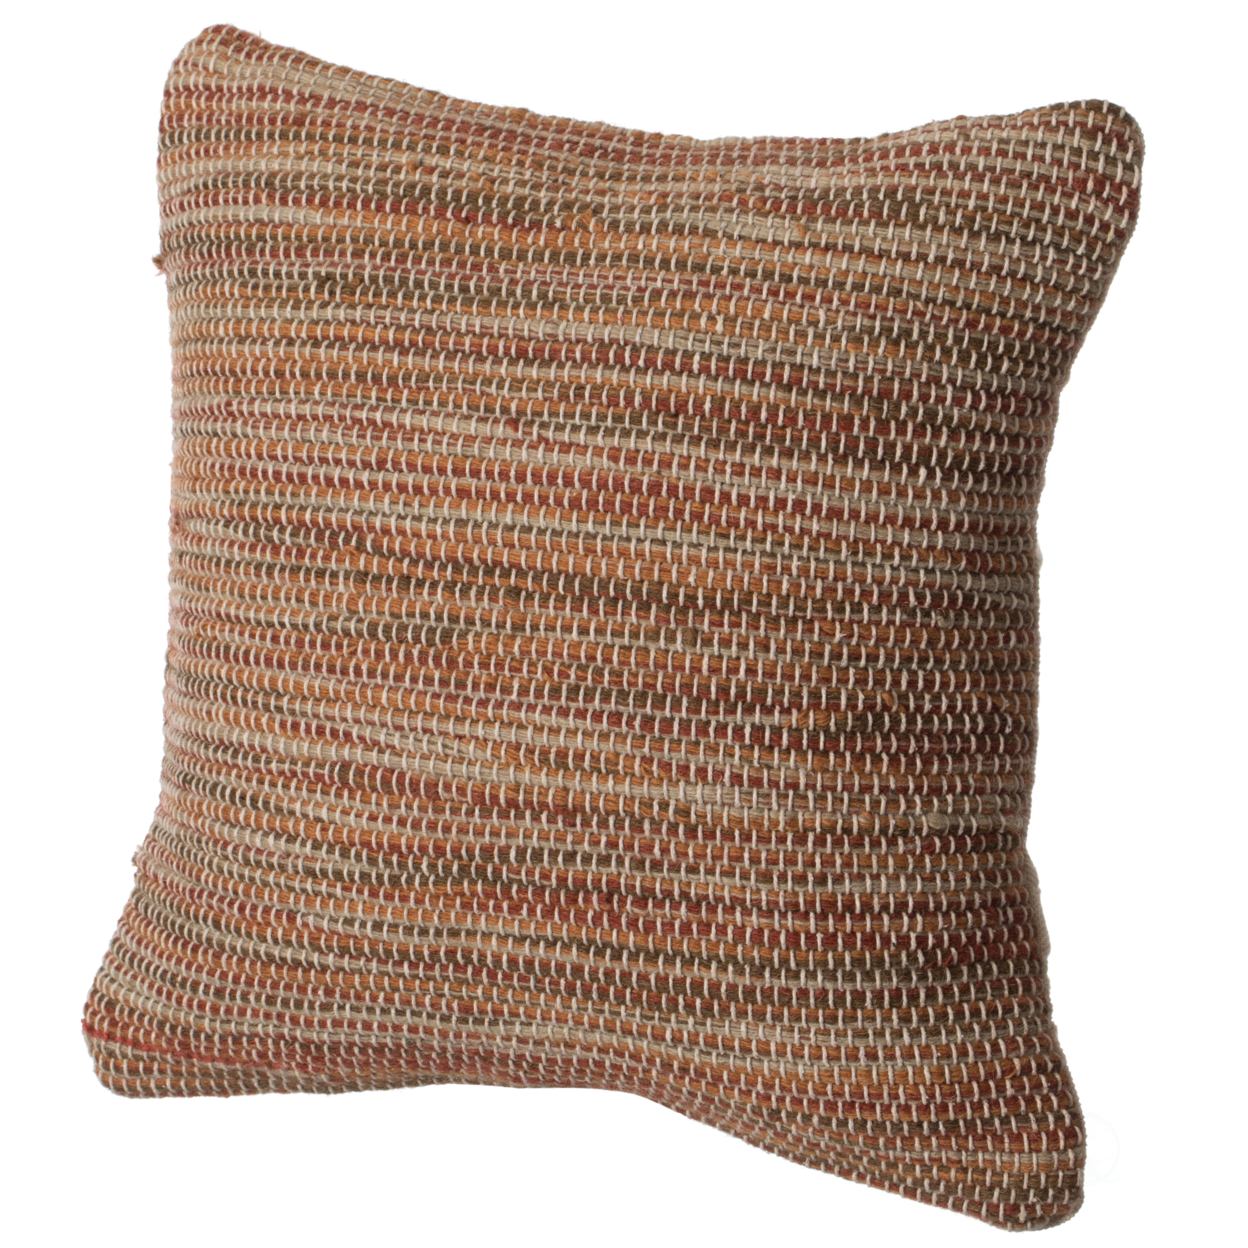 16 Handwoven Wool & Cotton Throw Pillow Cover With Woven Knit Texture - Rust